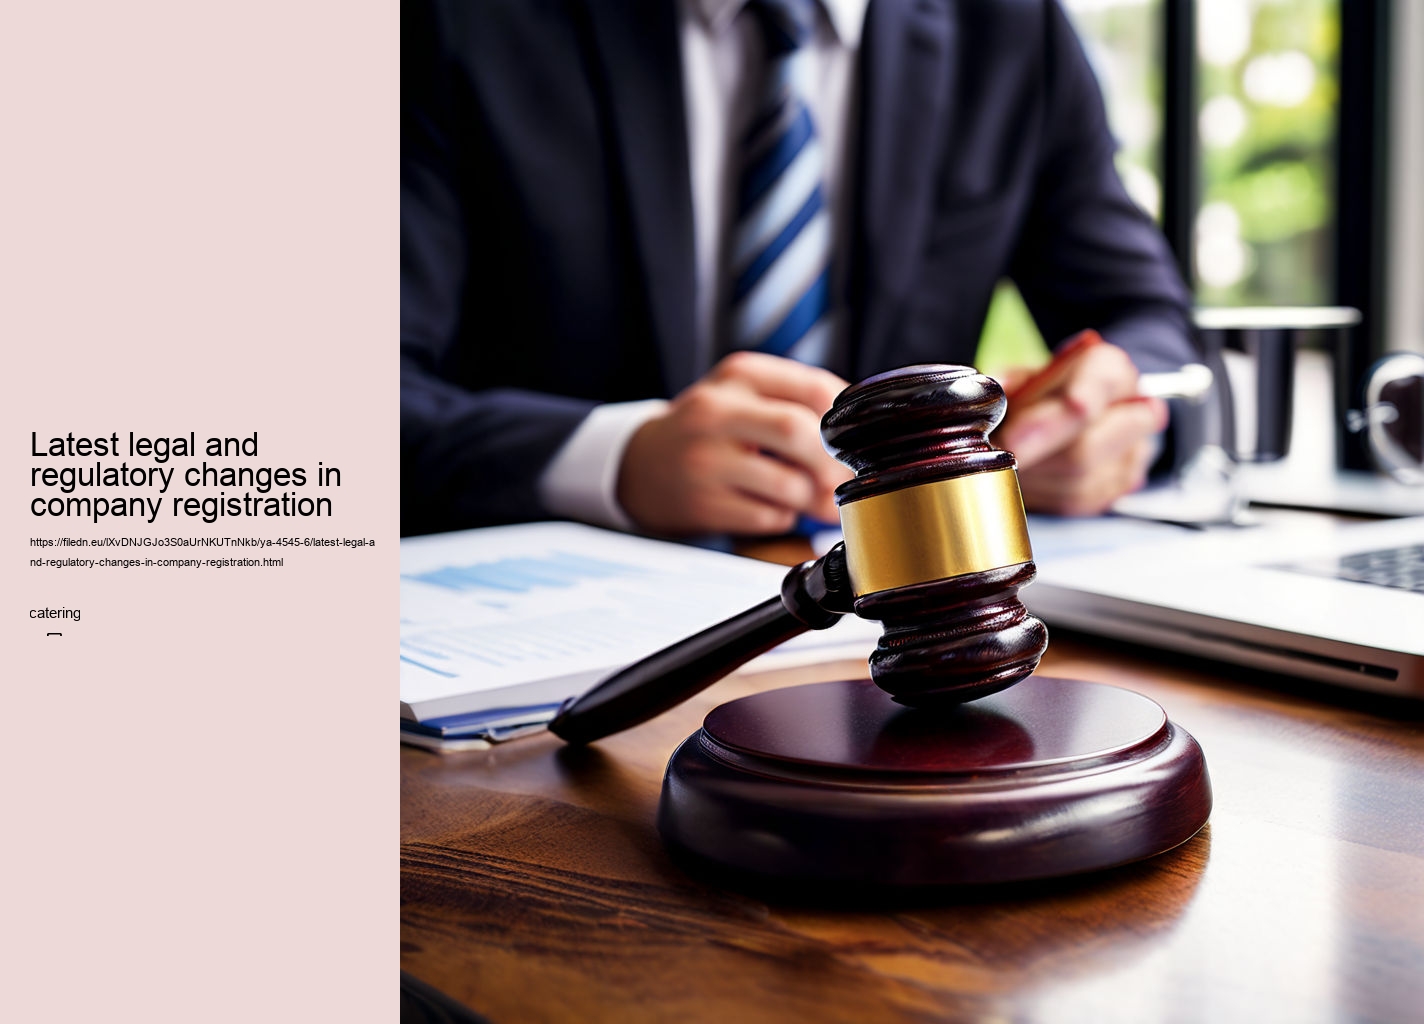 Latest legal and regulatory changes in company registration